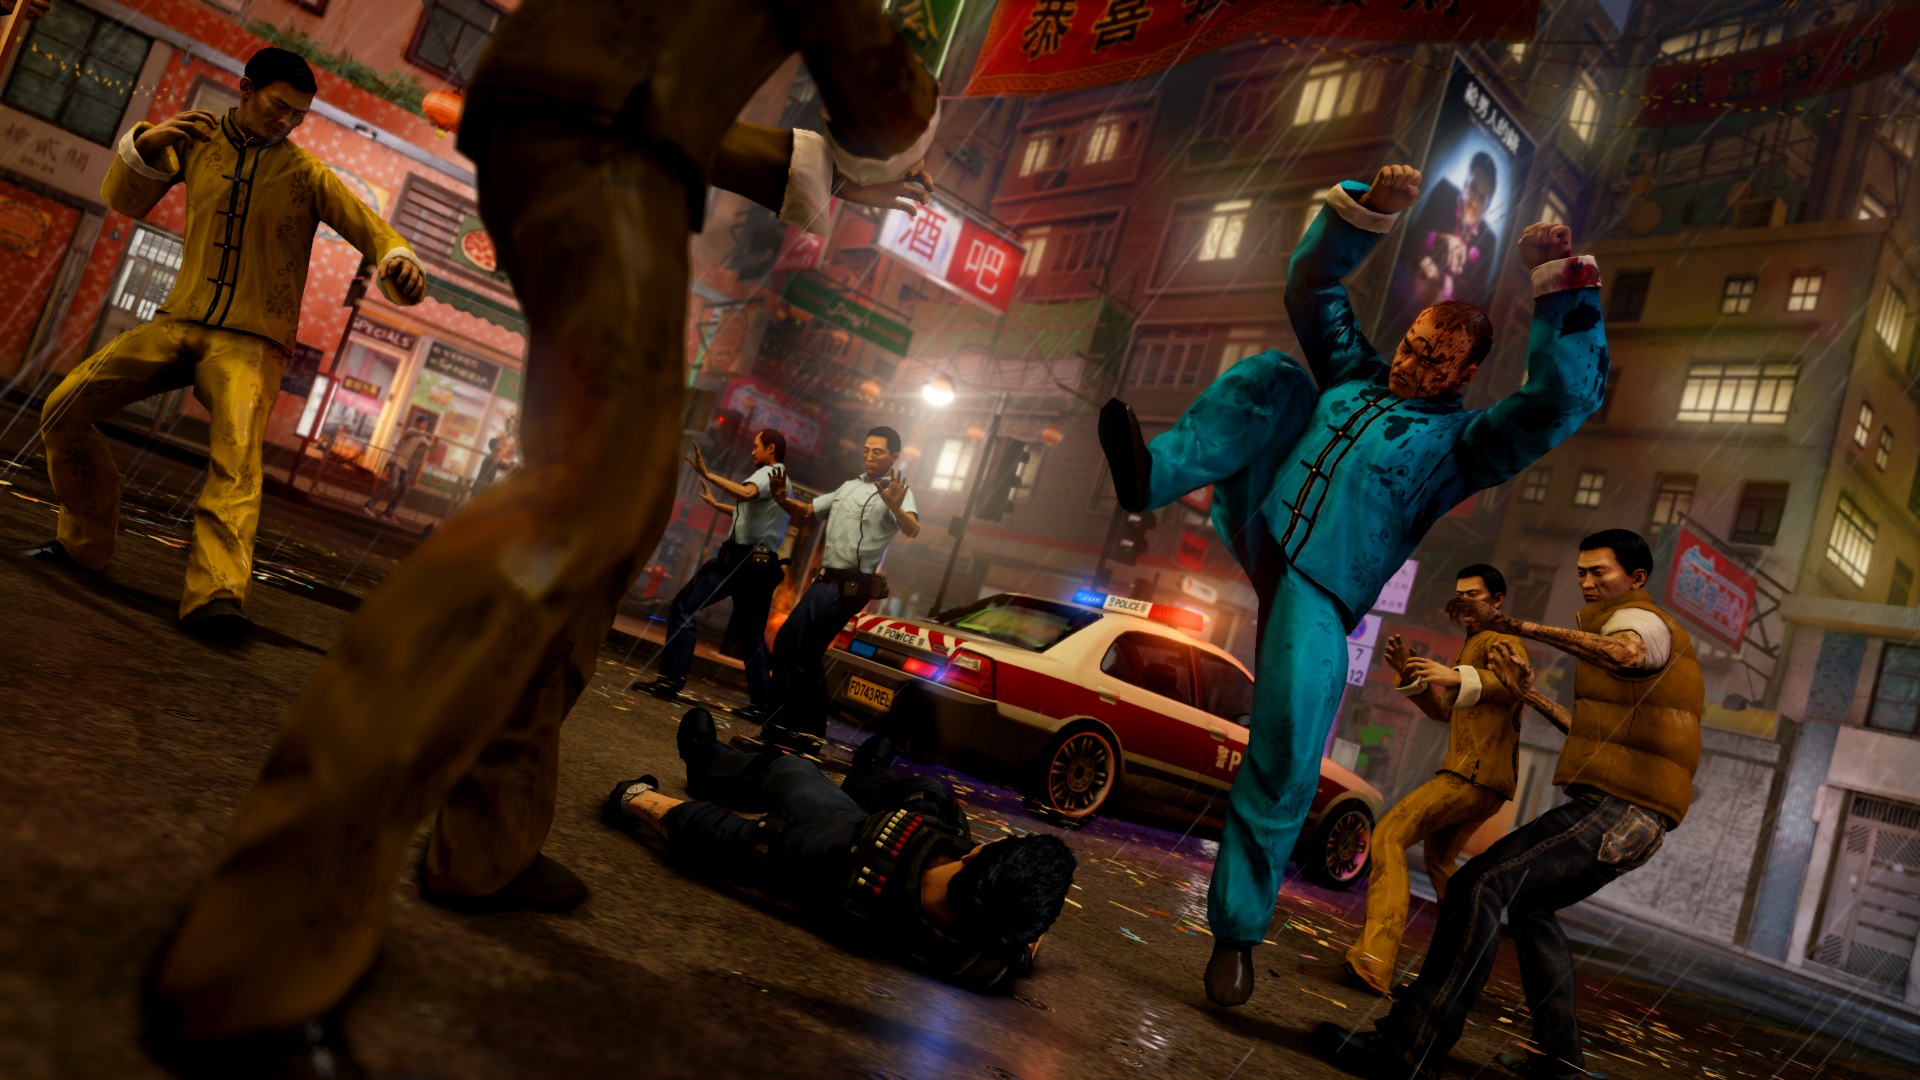 Sleeping Dogs release date announced